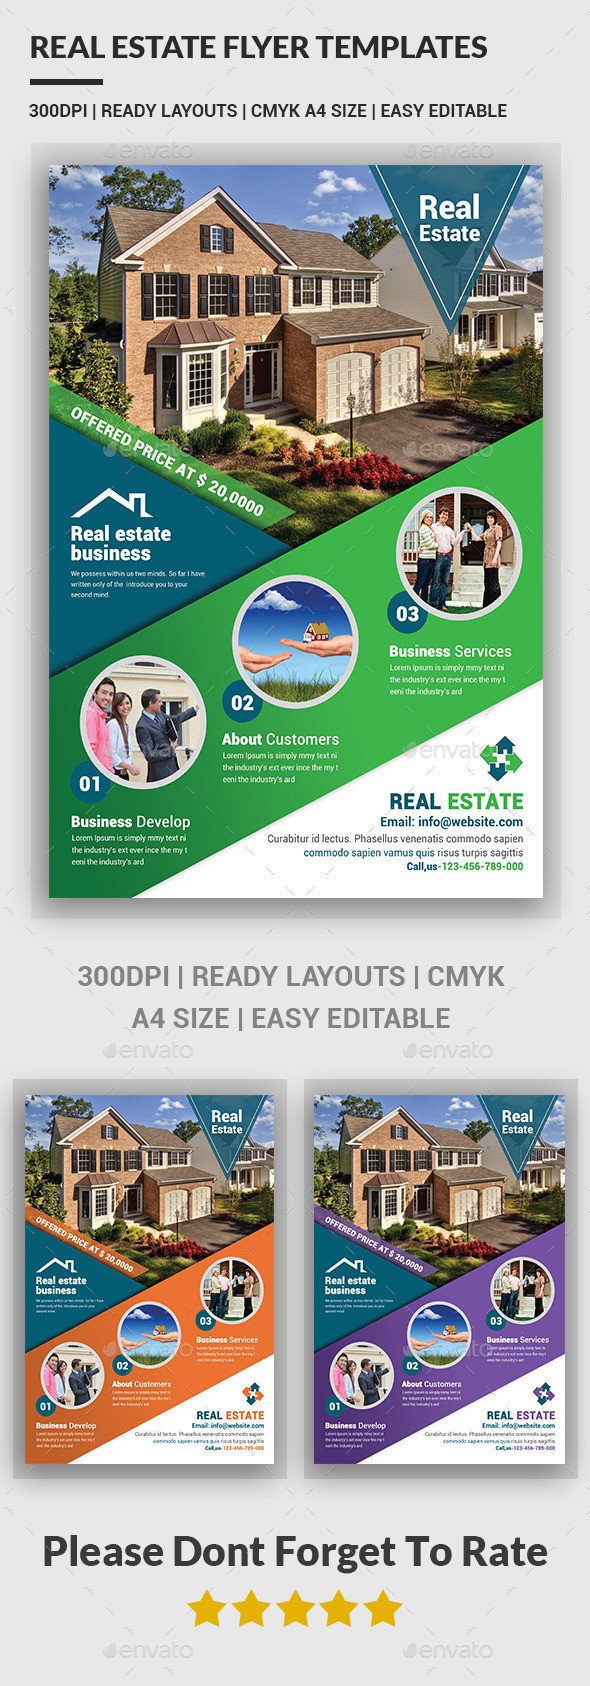 Real Estate Flyer Templates by afjamaal